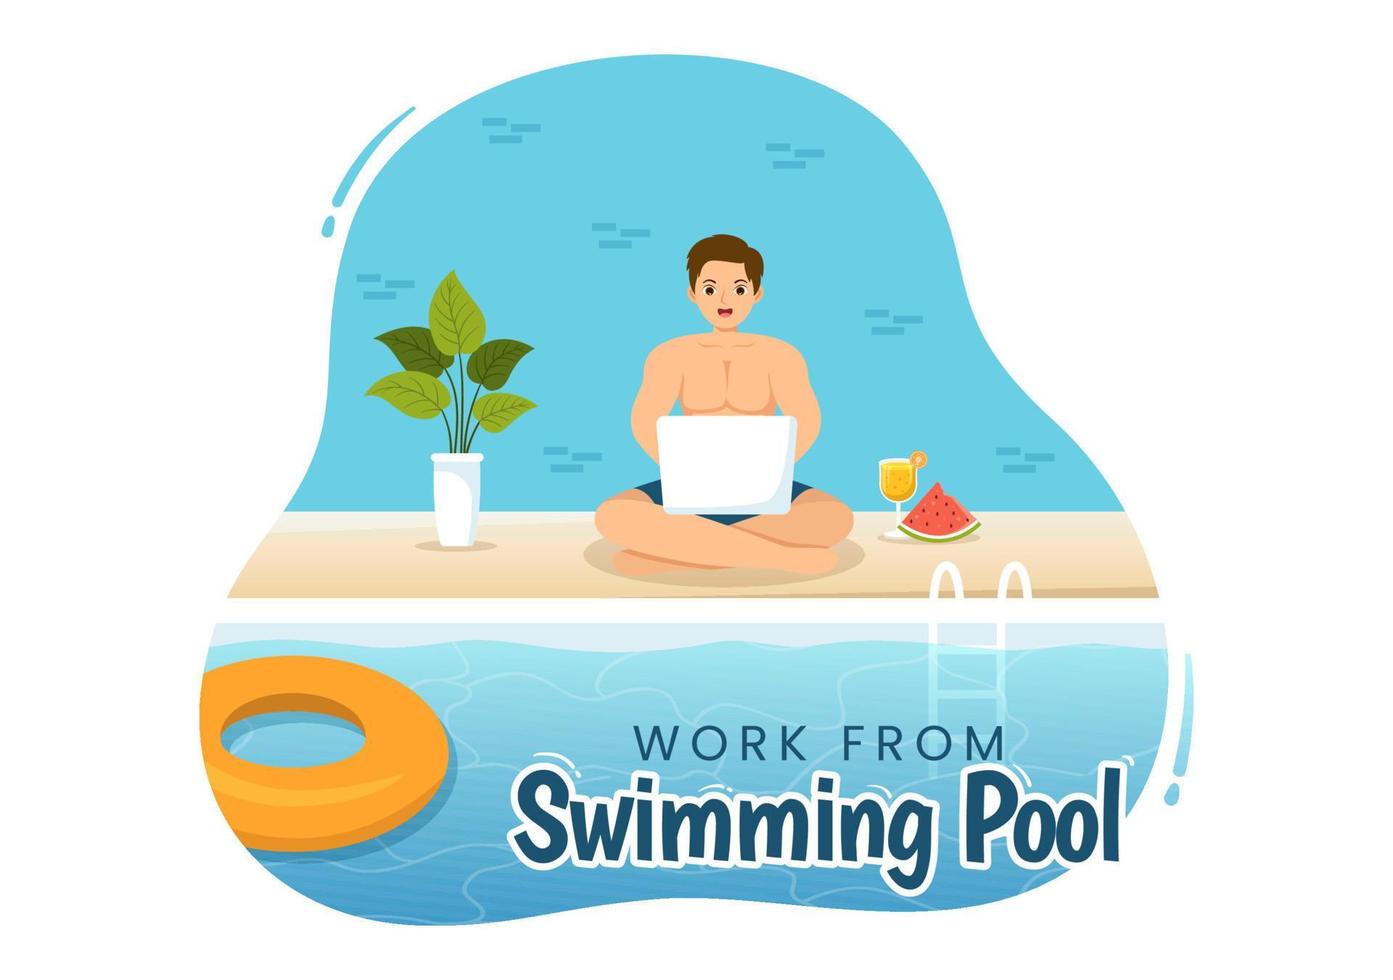 Freelance Workers From Swimming Pool Illustration with Relaxing, Drink Cocktails and Using Laptop in Cartoon Hand Drawn for Landing Page Templates vector